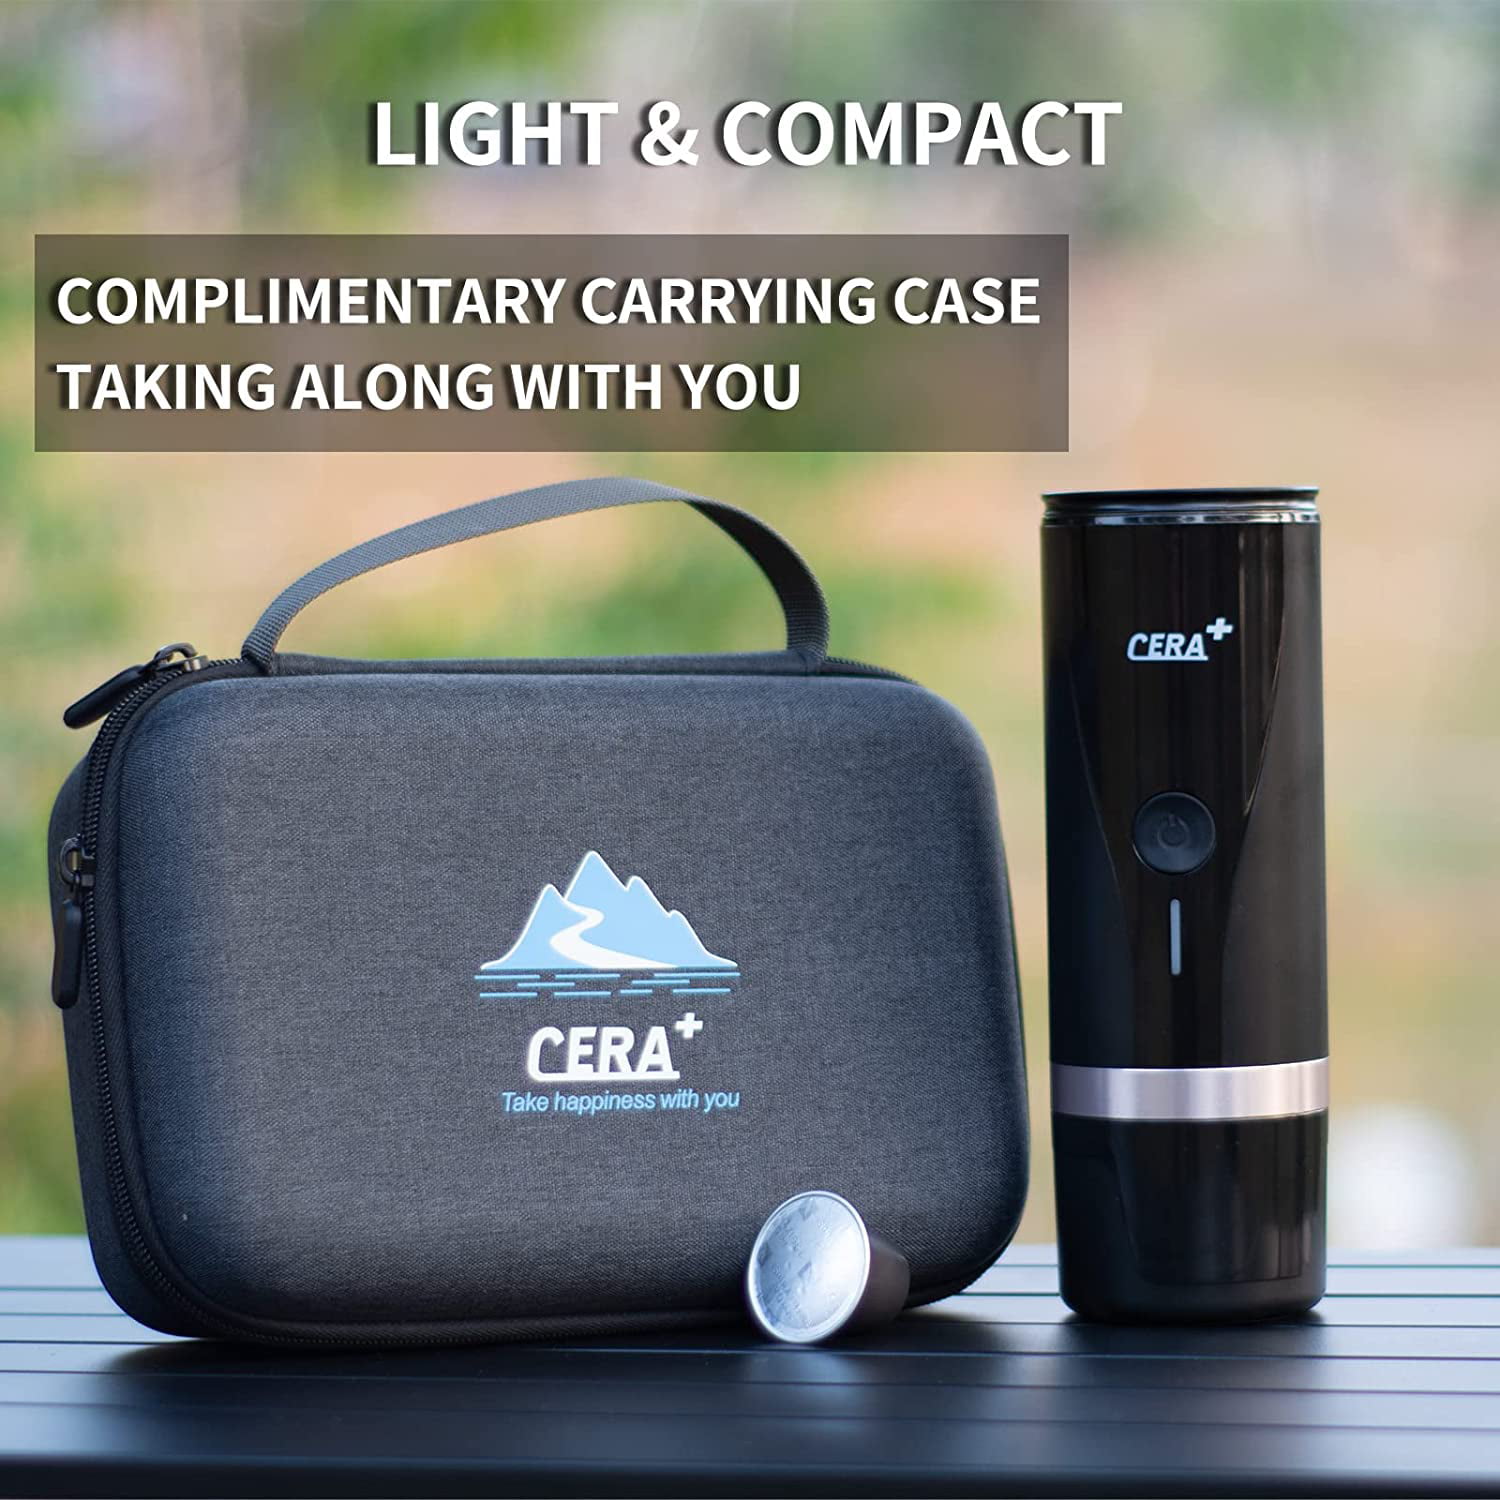 CERA+ Portable Mini Espresso Machine, 12V/24V Rechargeable Car Coffee Maker  with Self-Heating, 20 Bar Pressure Compatible with NS Pods & Ground Coffee